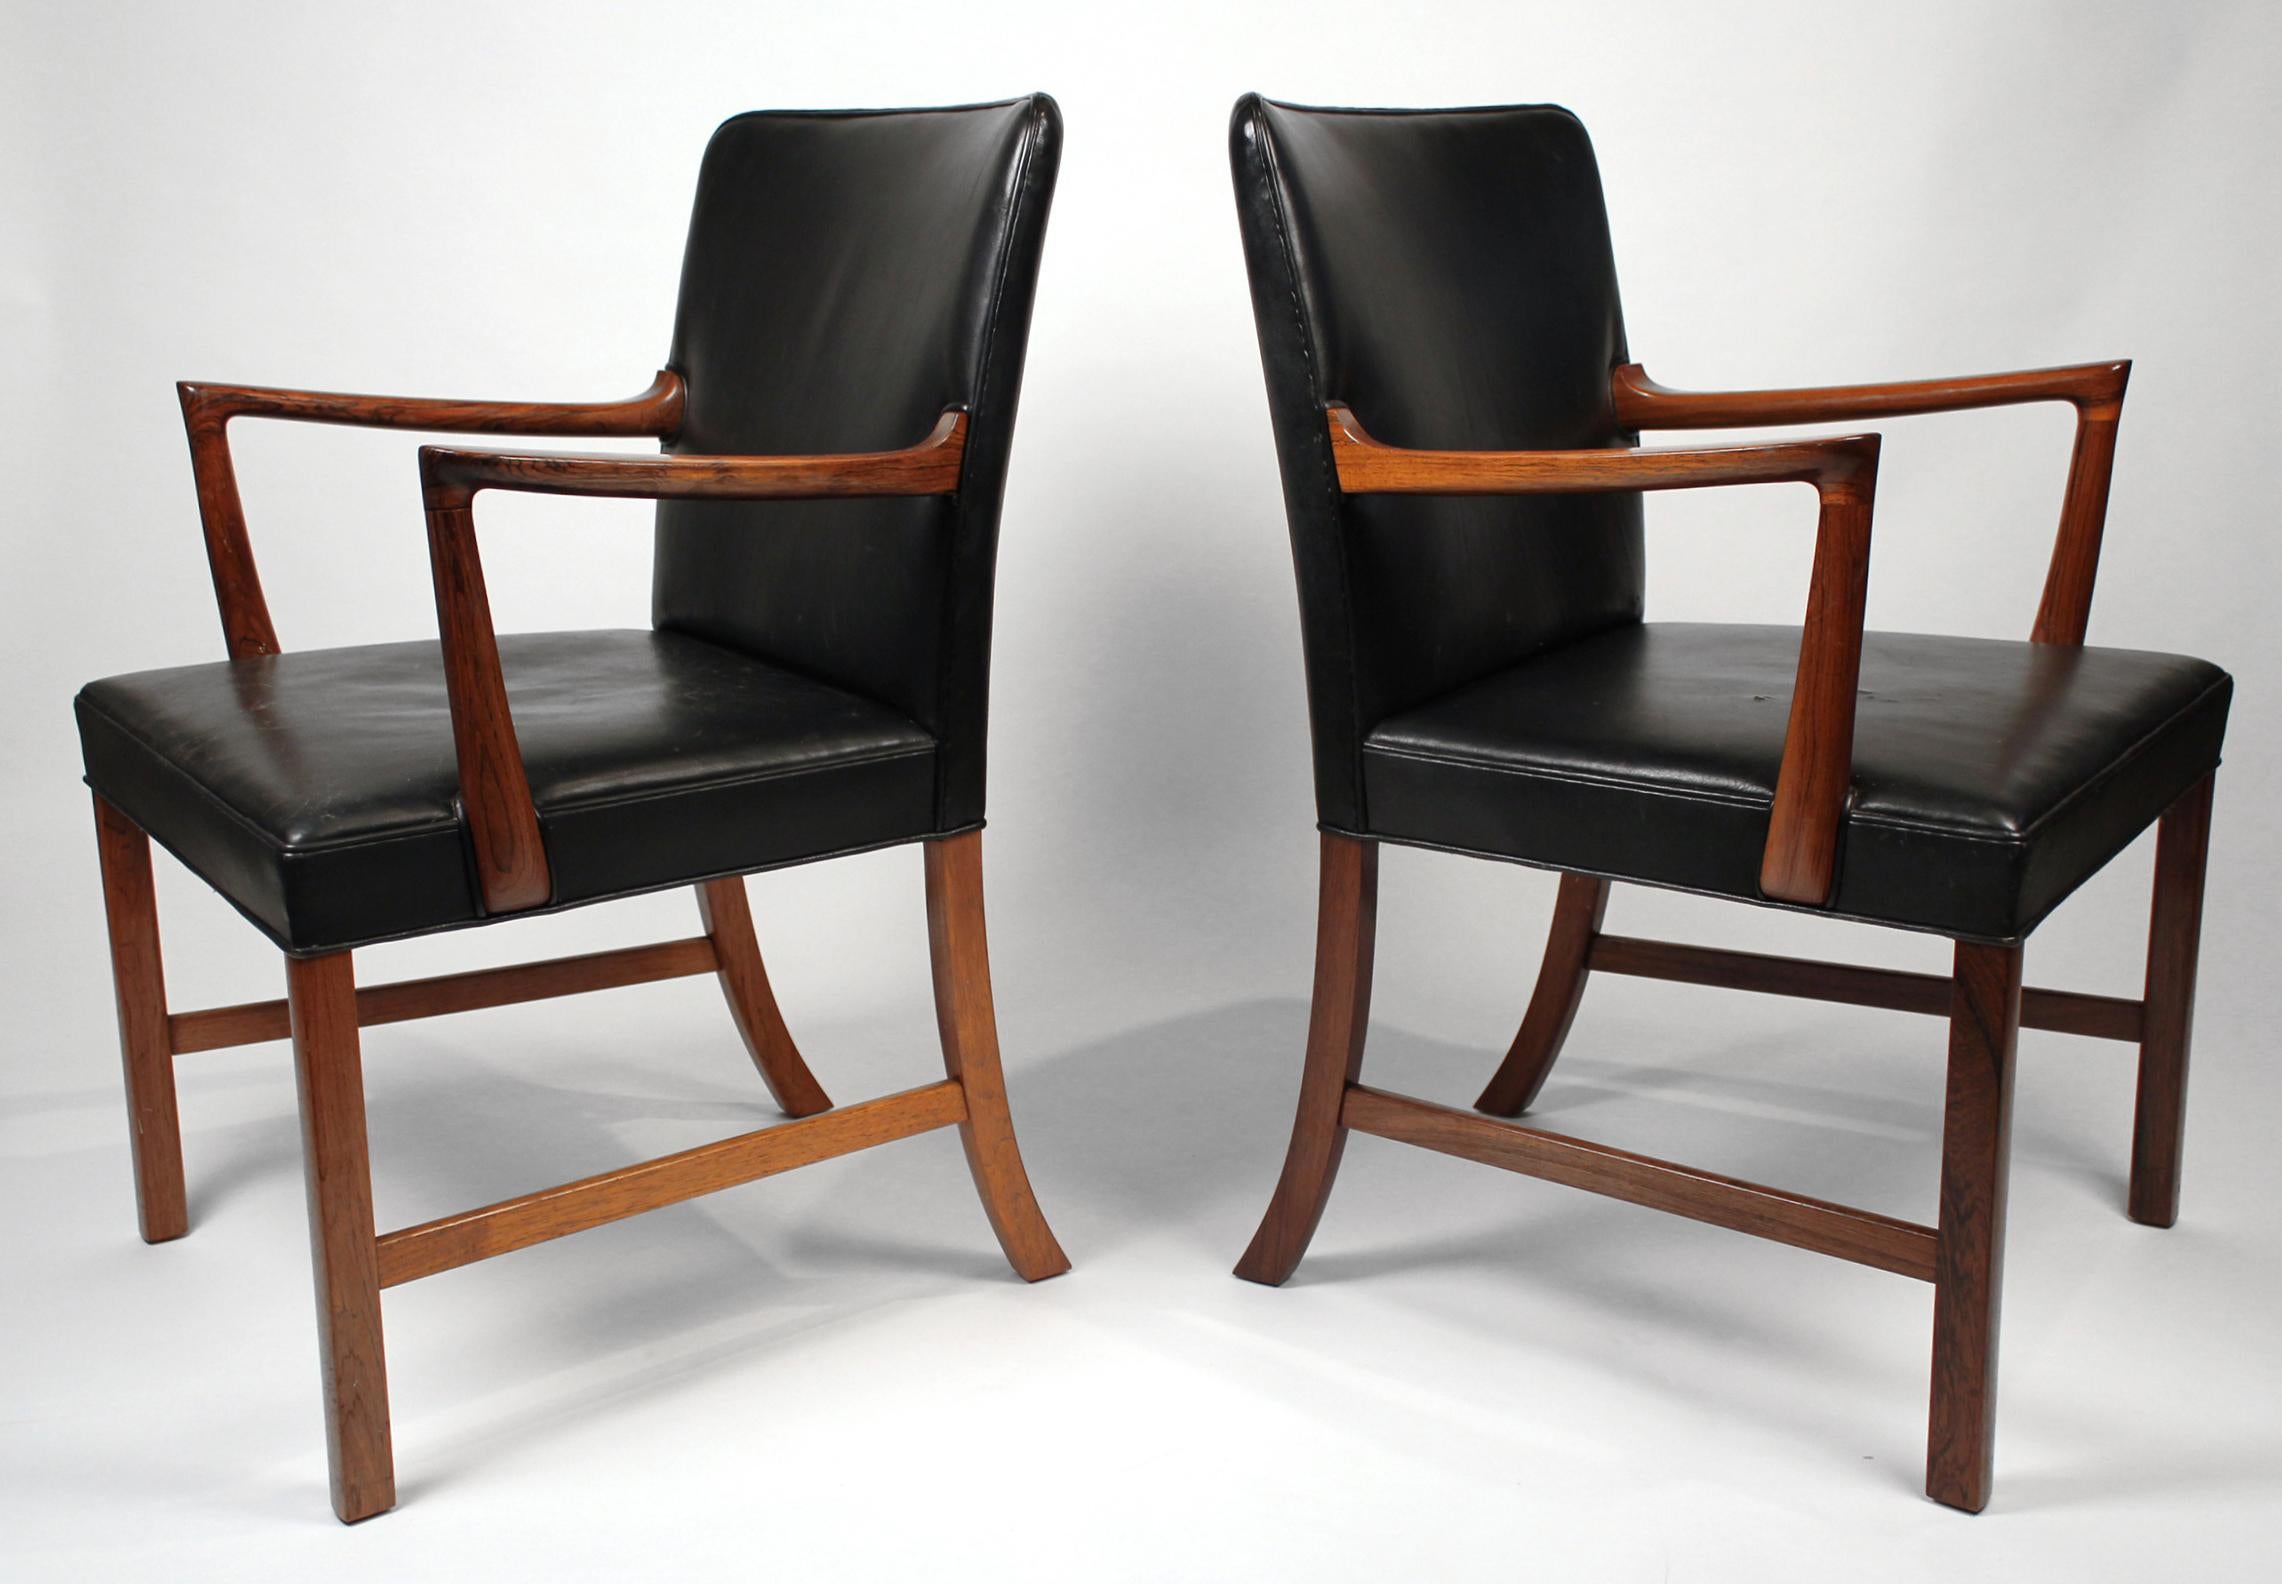 Pair of solid rosewood captain's chairs designed by Ole Wanscher, one of the leading figures in the Scandinavian design movement. These chairs were produced by A.J. Iversen Snedkermester in Copenhagen, Denmark in 1960. This pair originated from the